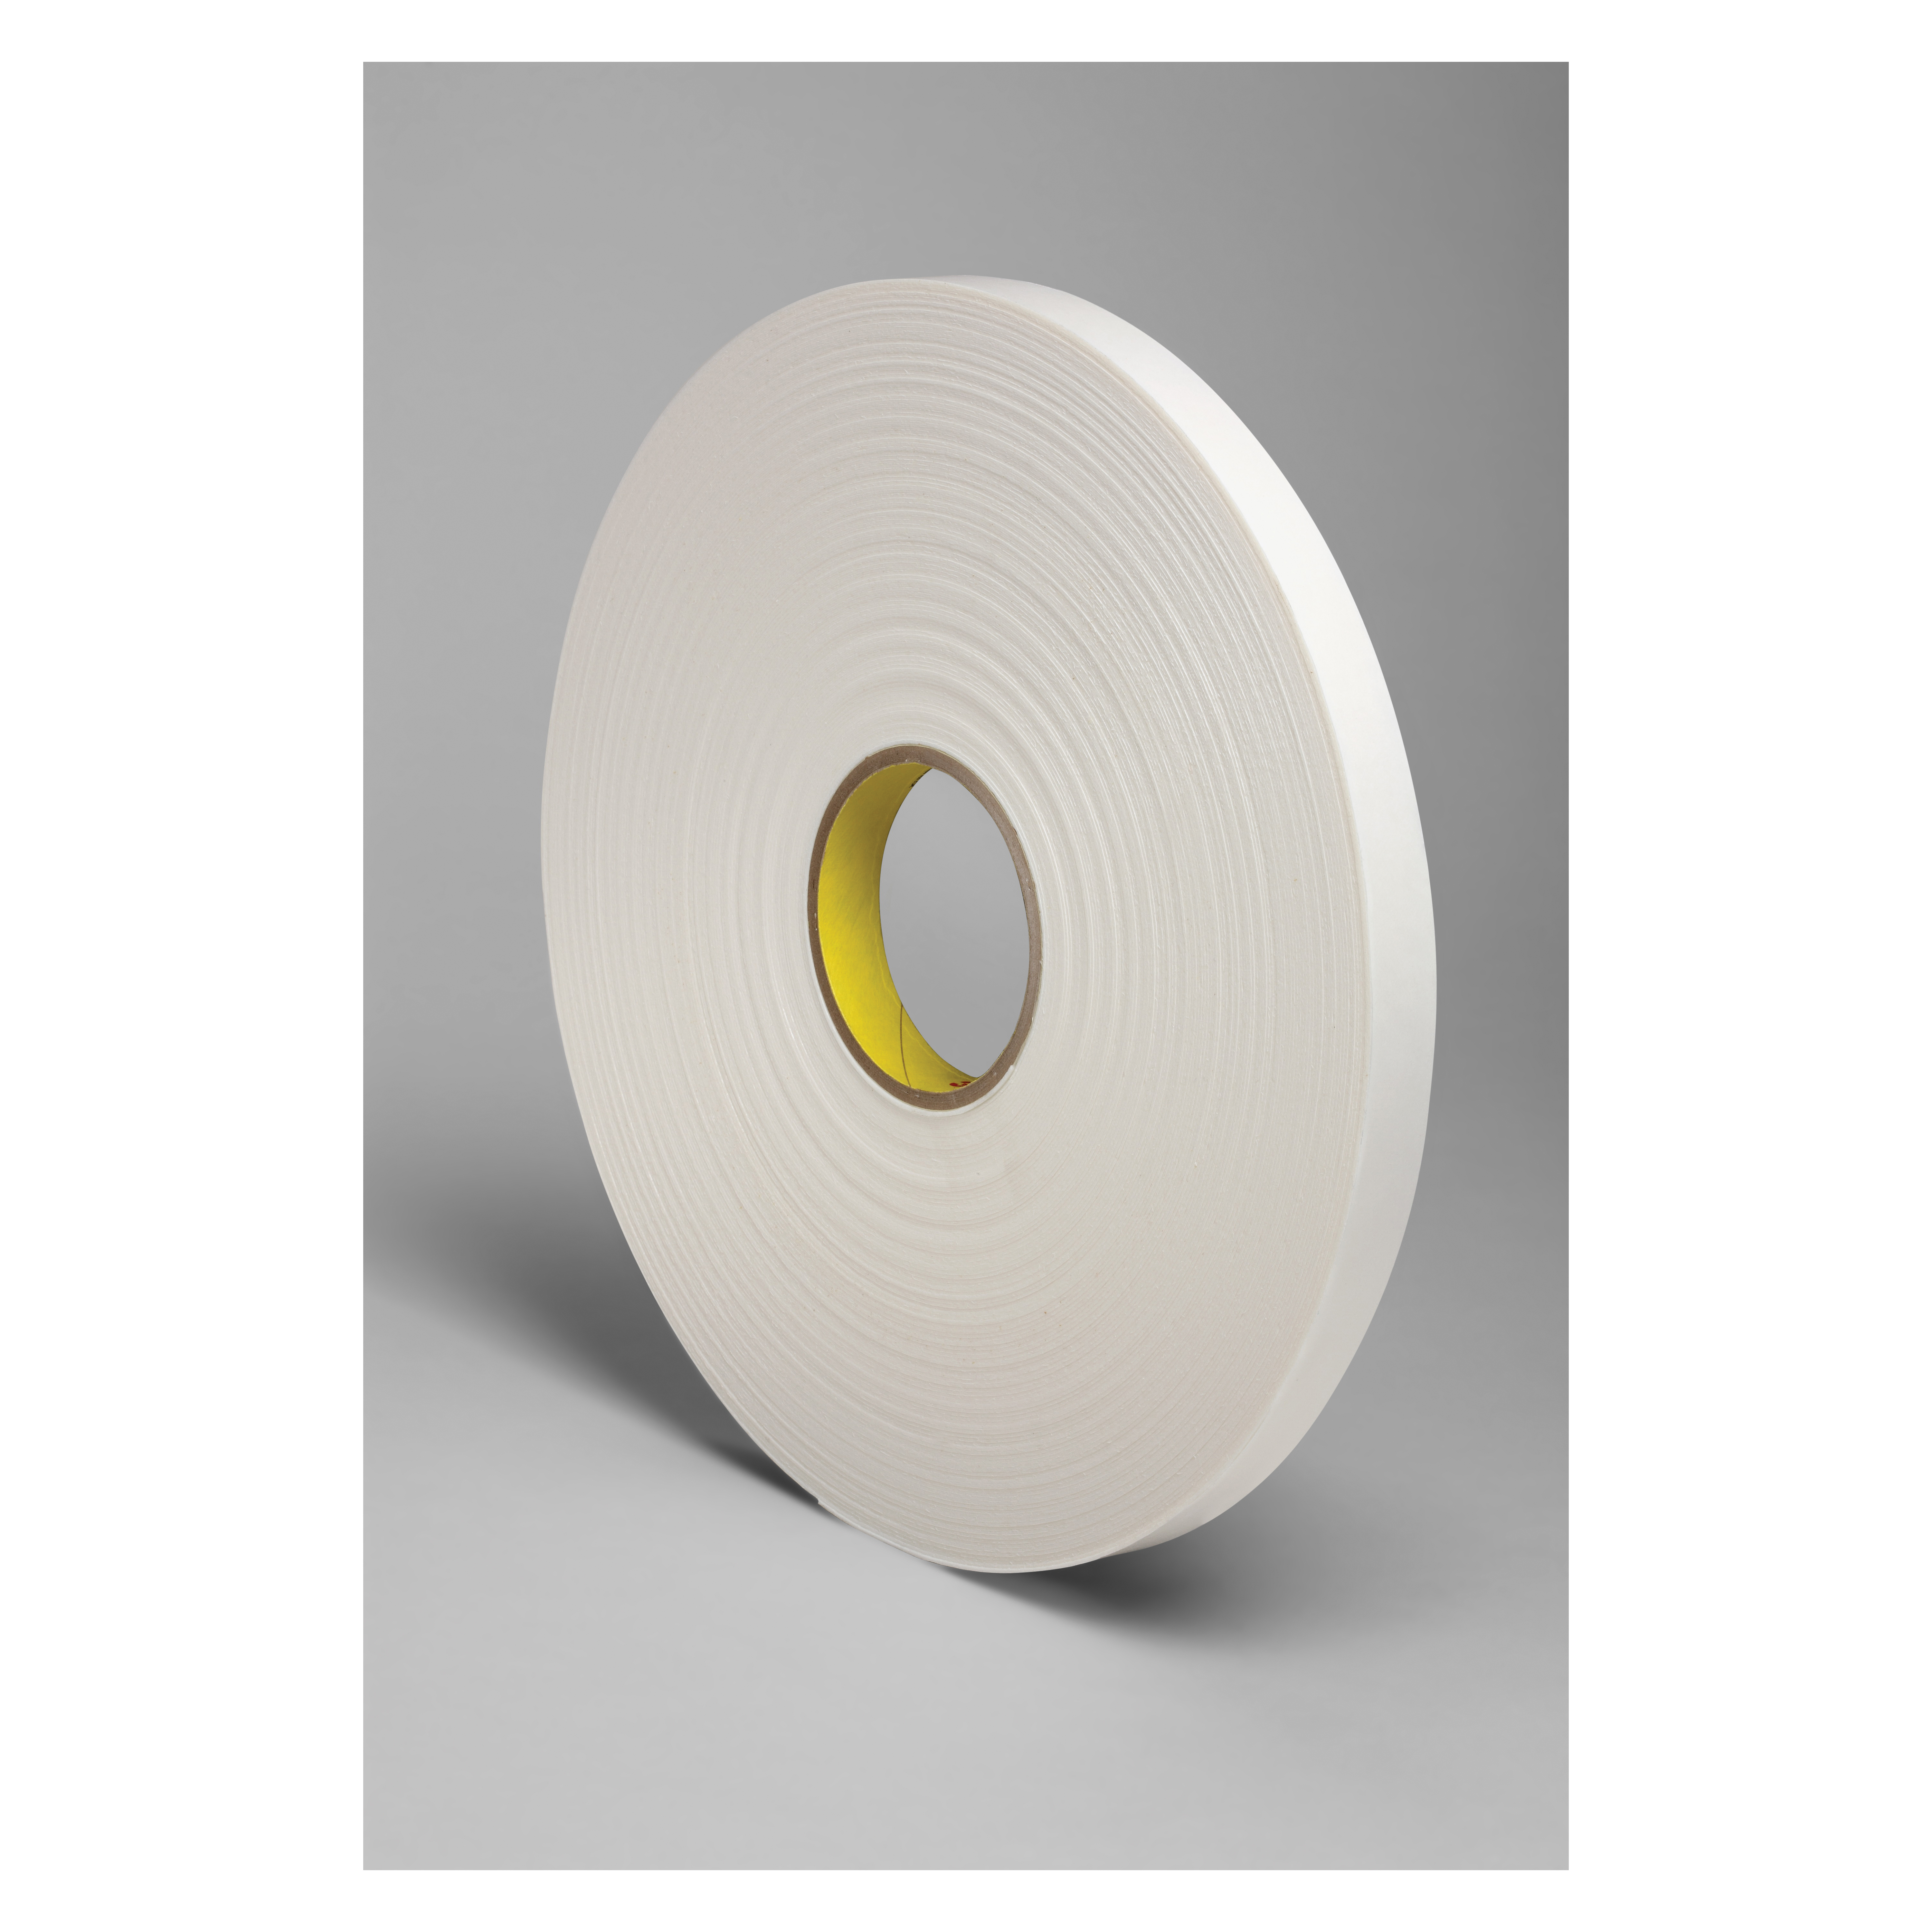 3M™ 021200-03416 Single Coated Foam Tape, 18 yd L x 3 in W, 250 mil THK, Acrylic Adhesive, Urethane Foam Backing, Natural